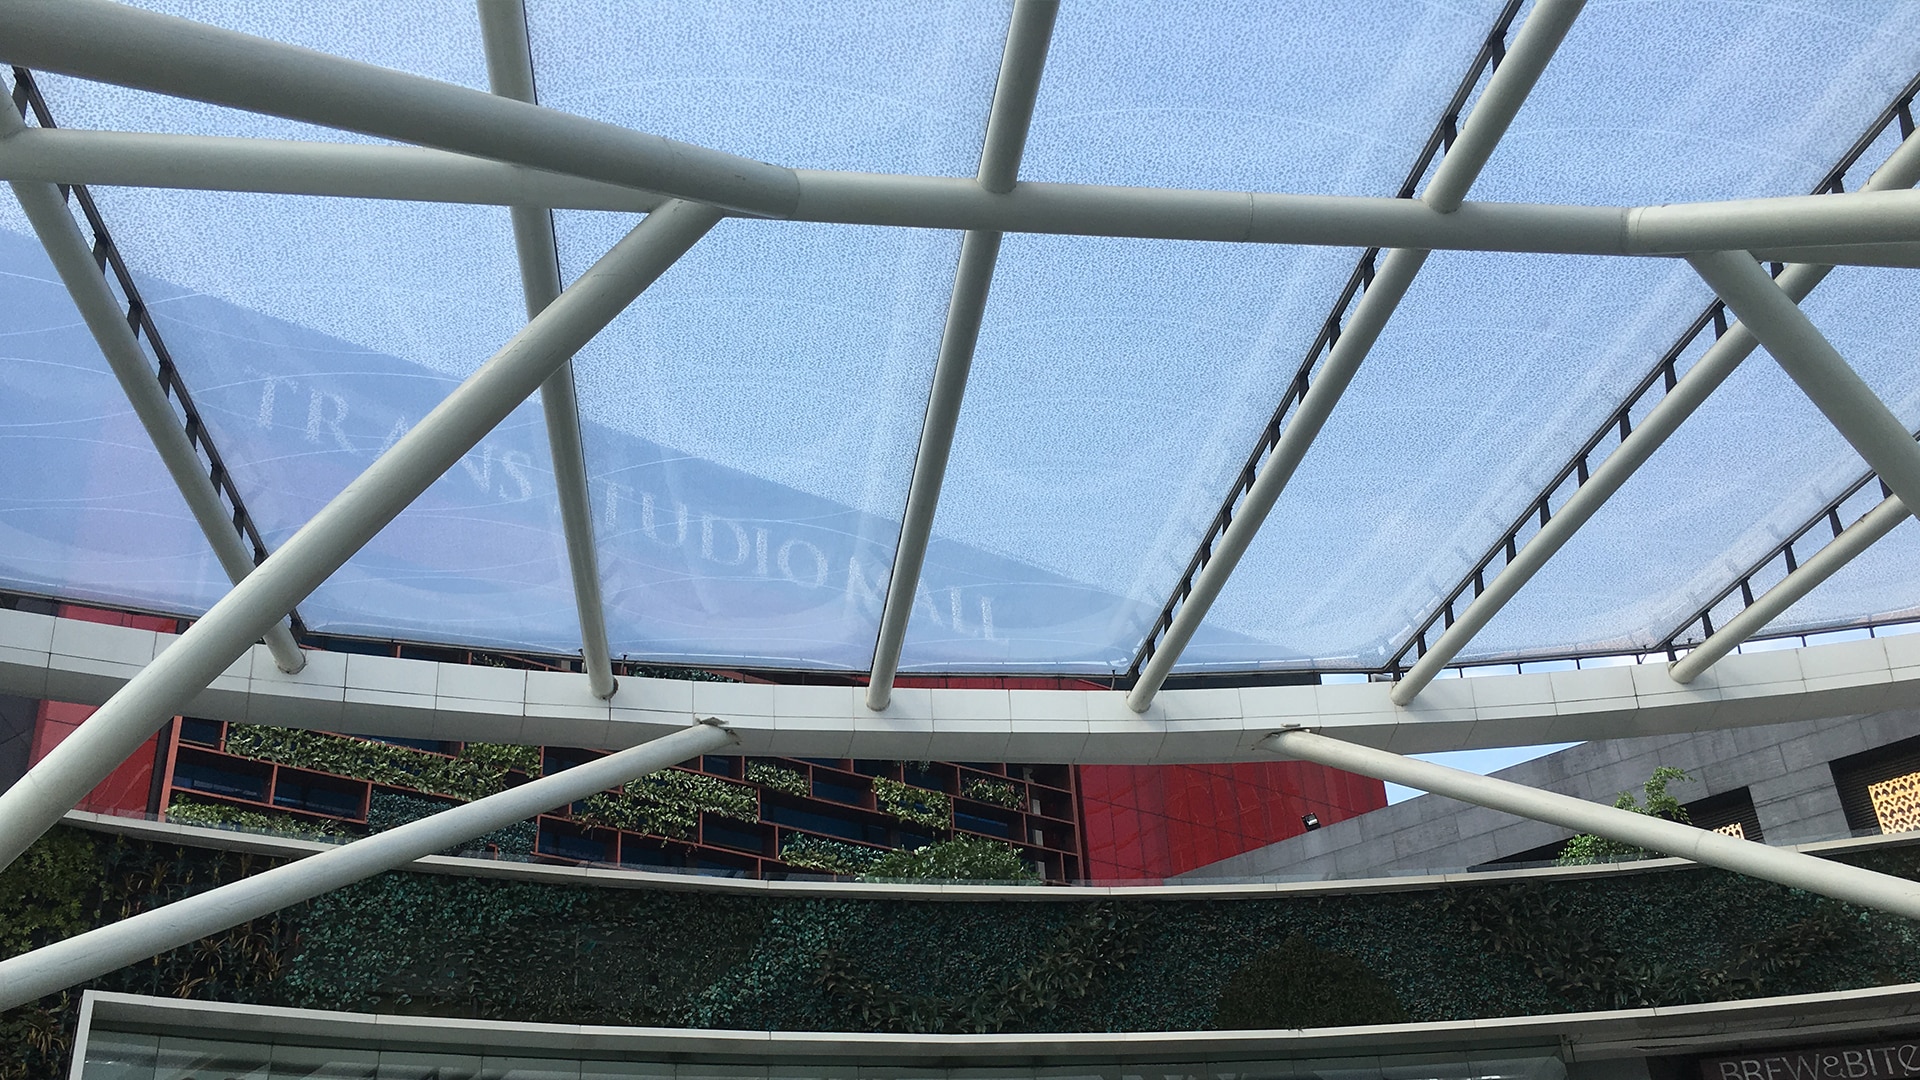 The owners of Trans Studio Mall Bandung decided for a Texlon® ETFE canopy providing shelter to their visitors.